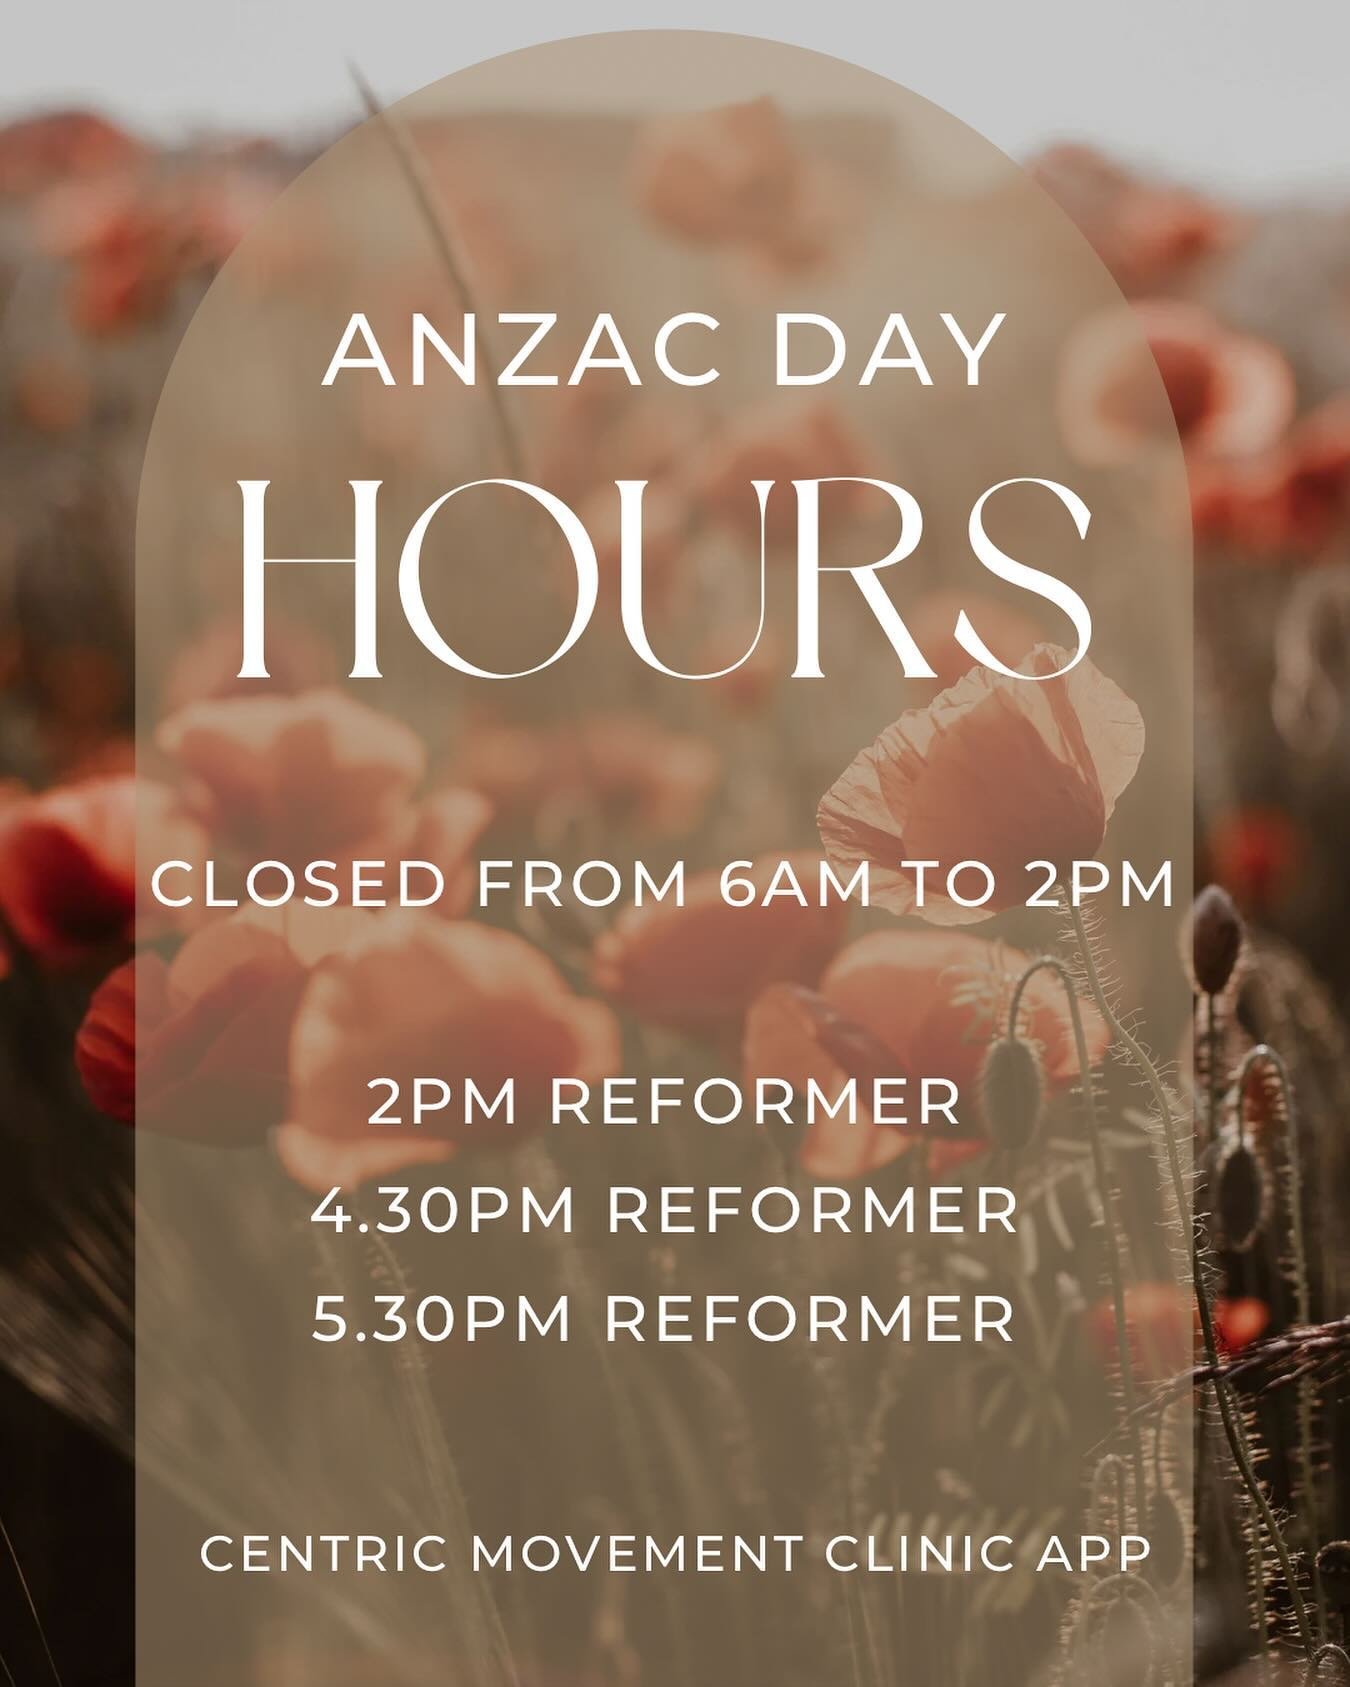 We will be closed most of ANZAC Day with some reformer classes running in the afternoon.